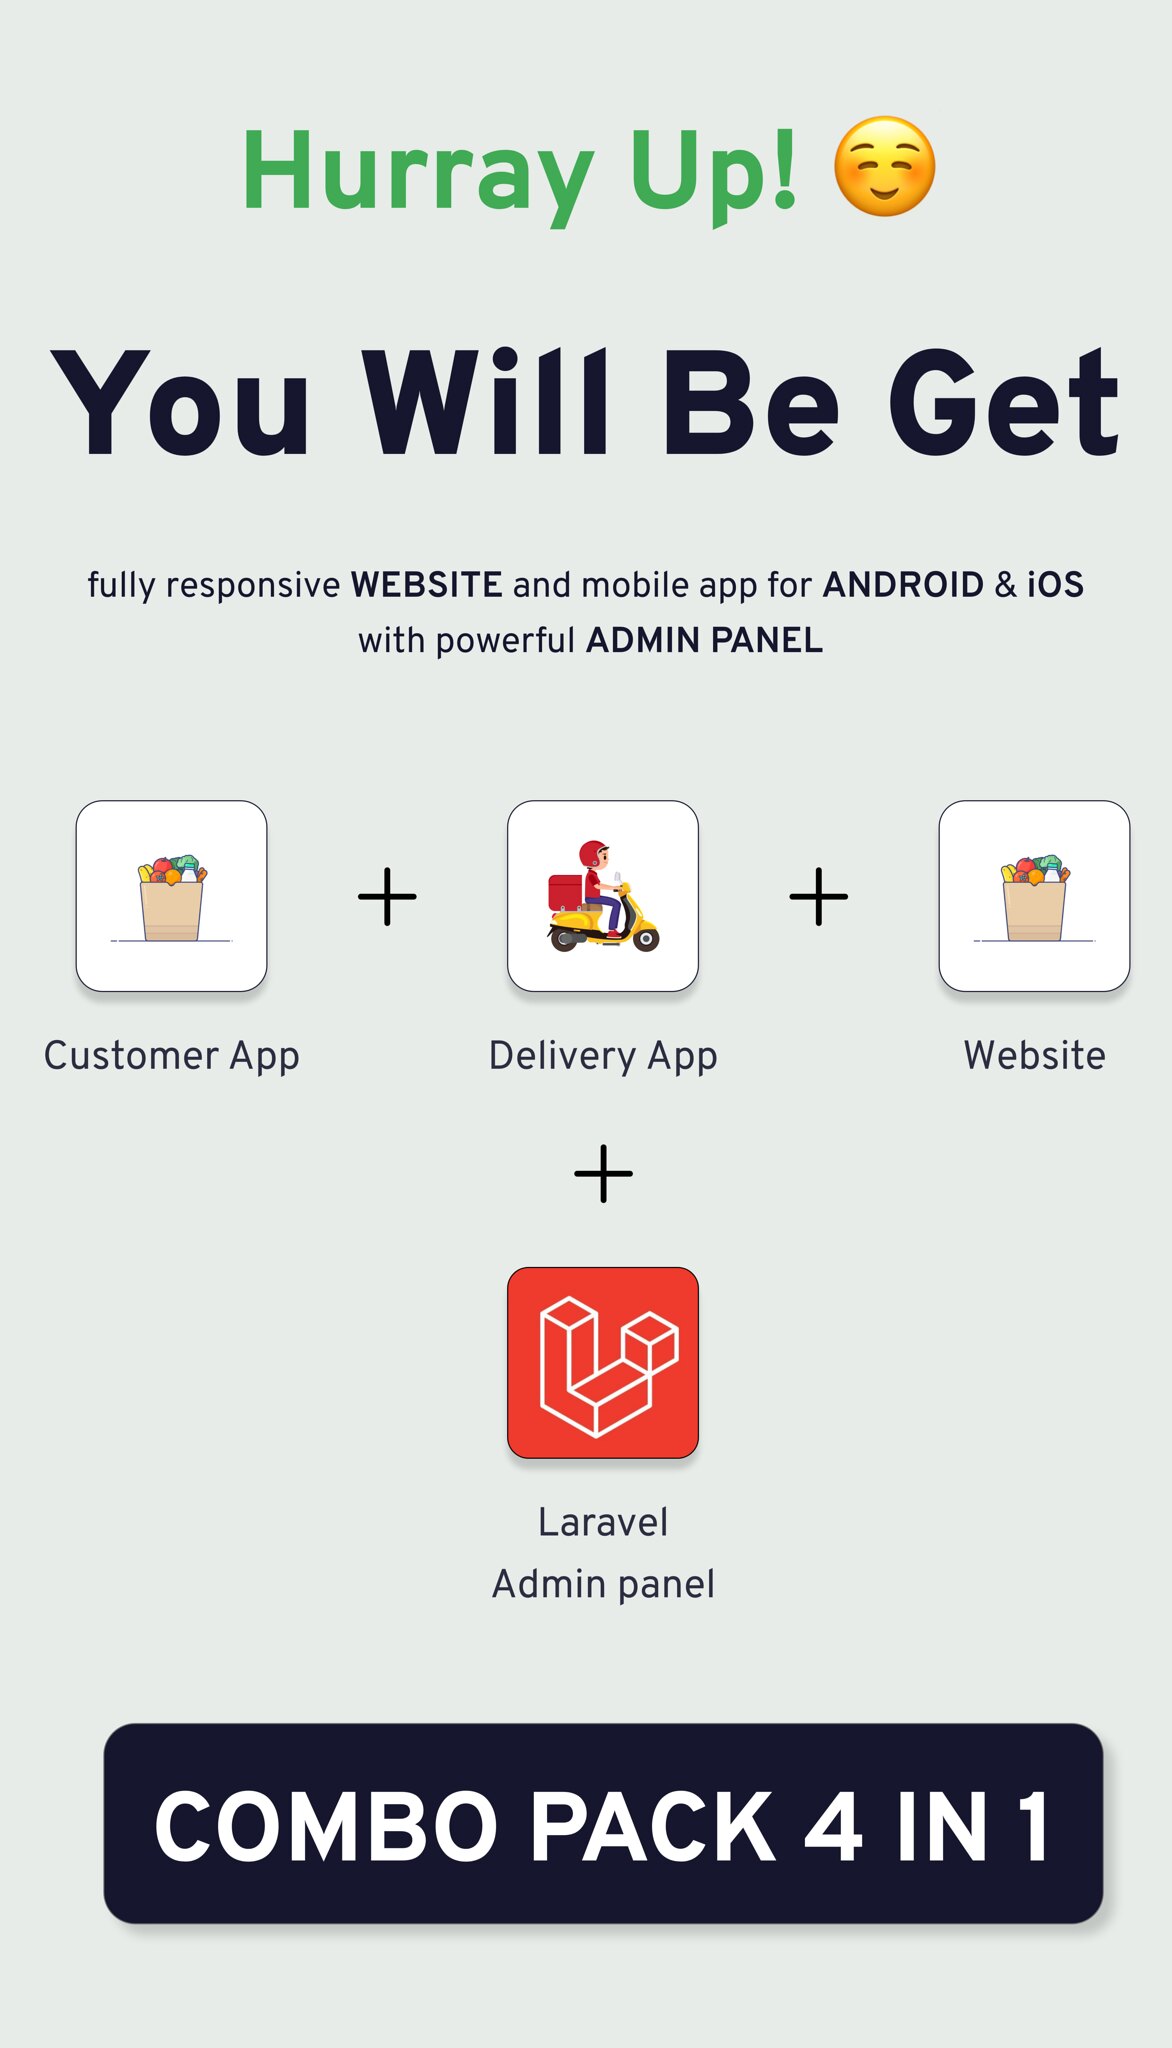 eGrocery - (Grocery, Pharmacy, eCommerce, Store) App and Web with Laravel Admin Panel + DeliveryApp - 2